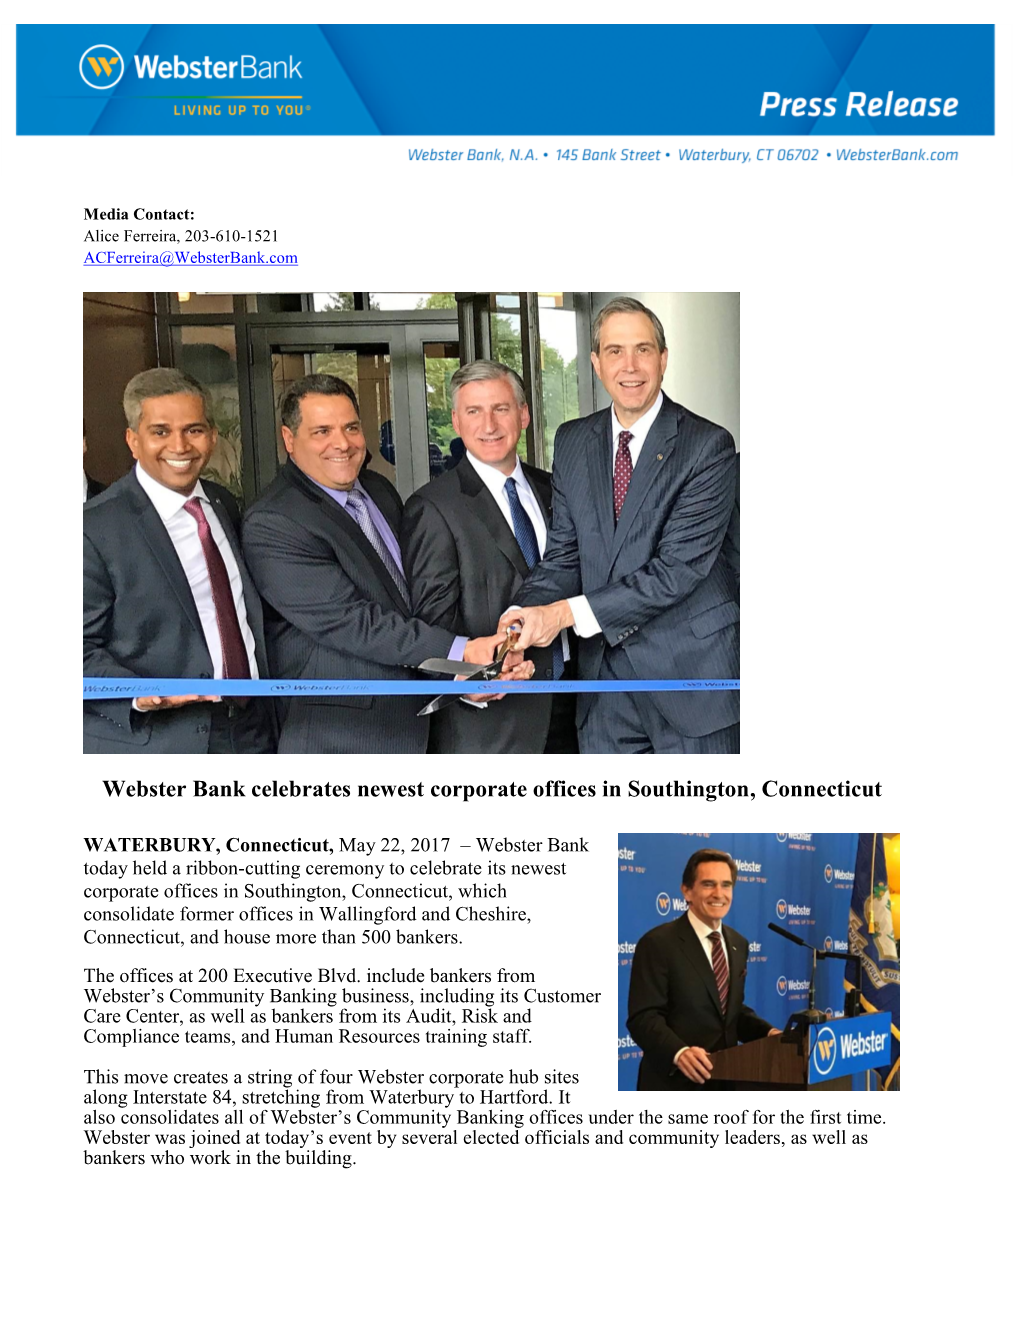 Webster Bank Celebrates Newest Corporate Offices in Southington, Connecticut